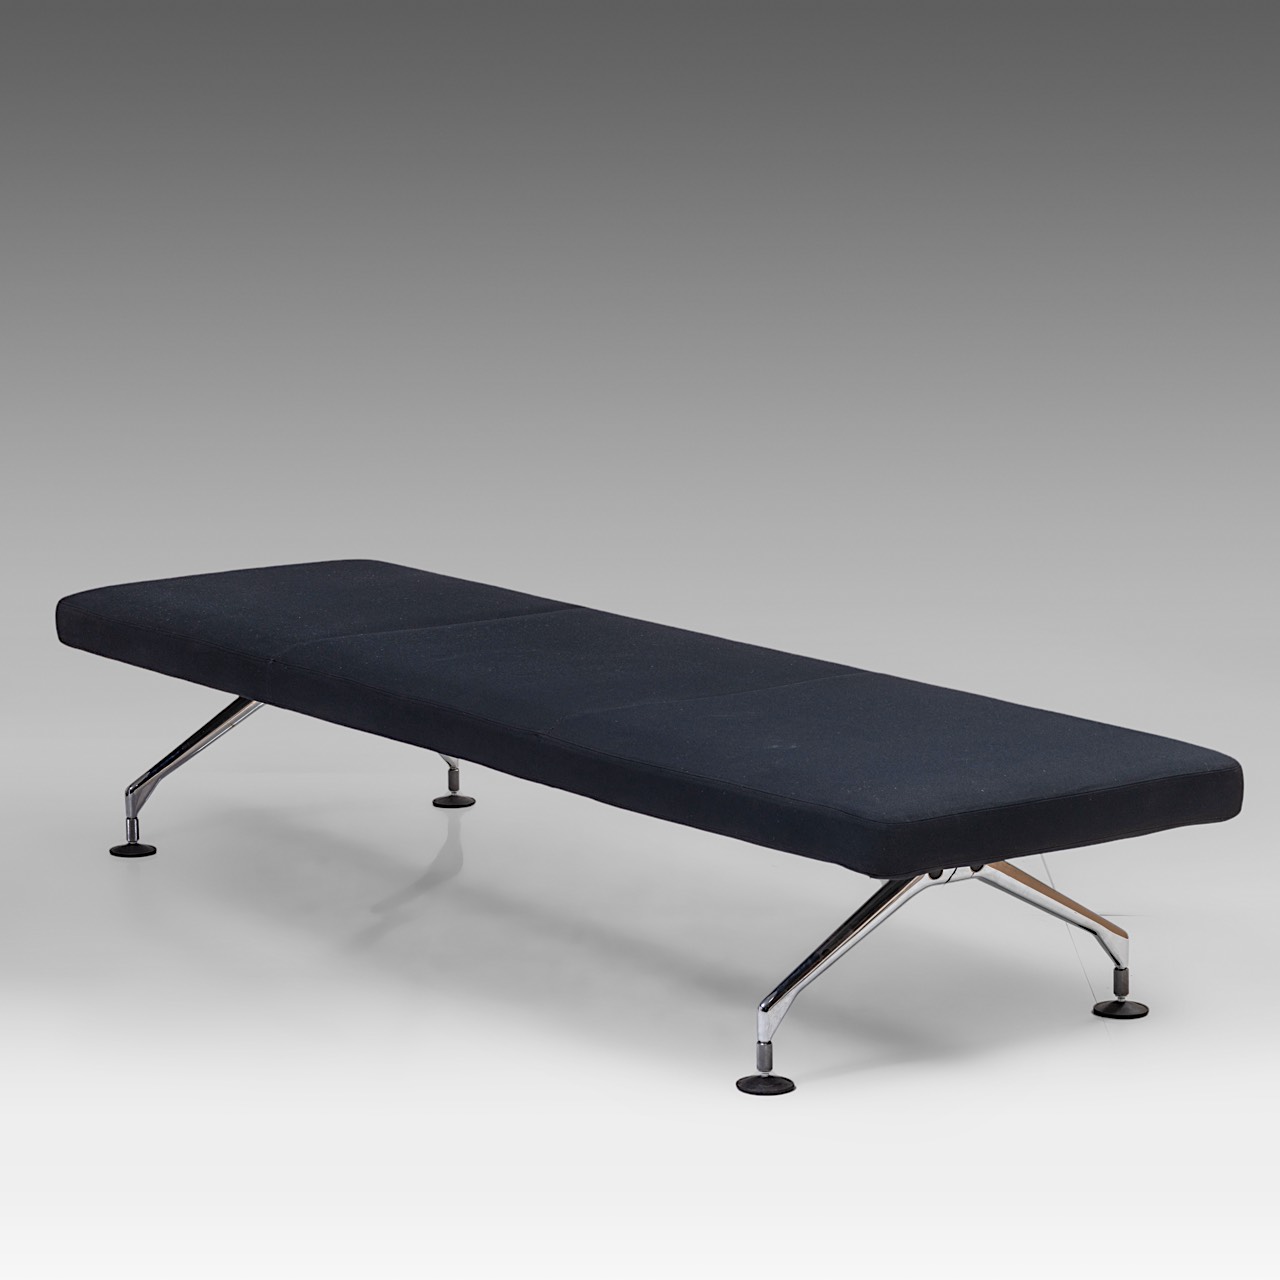 A pair of Antonio Citterio daybeds for Vitra, H 42 - W 222 - D 68 cm - Image 2 of 8